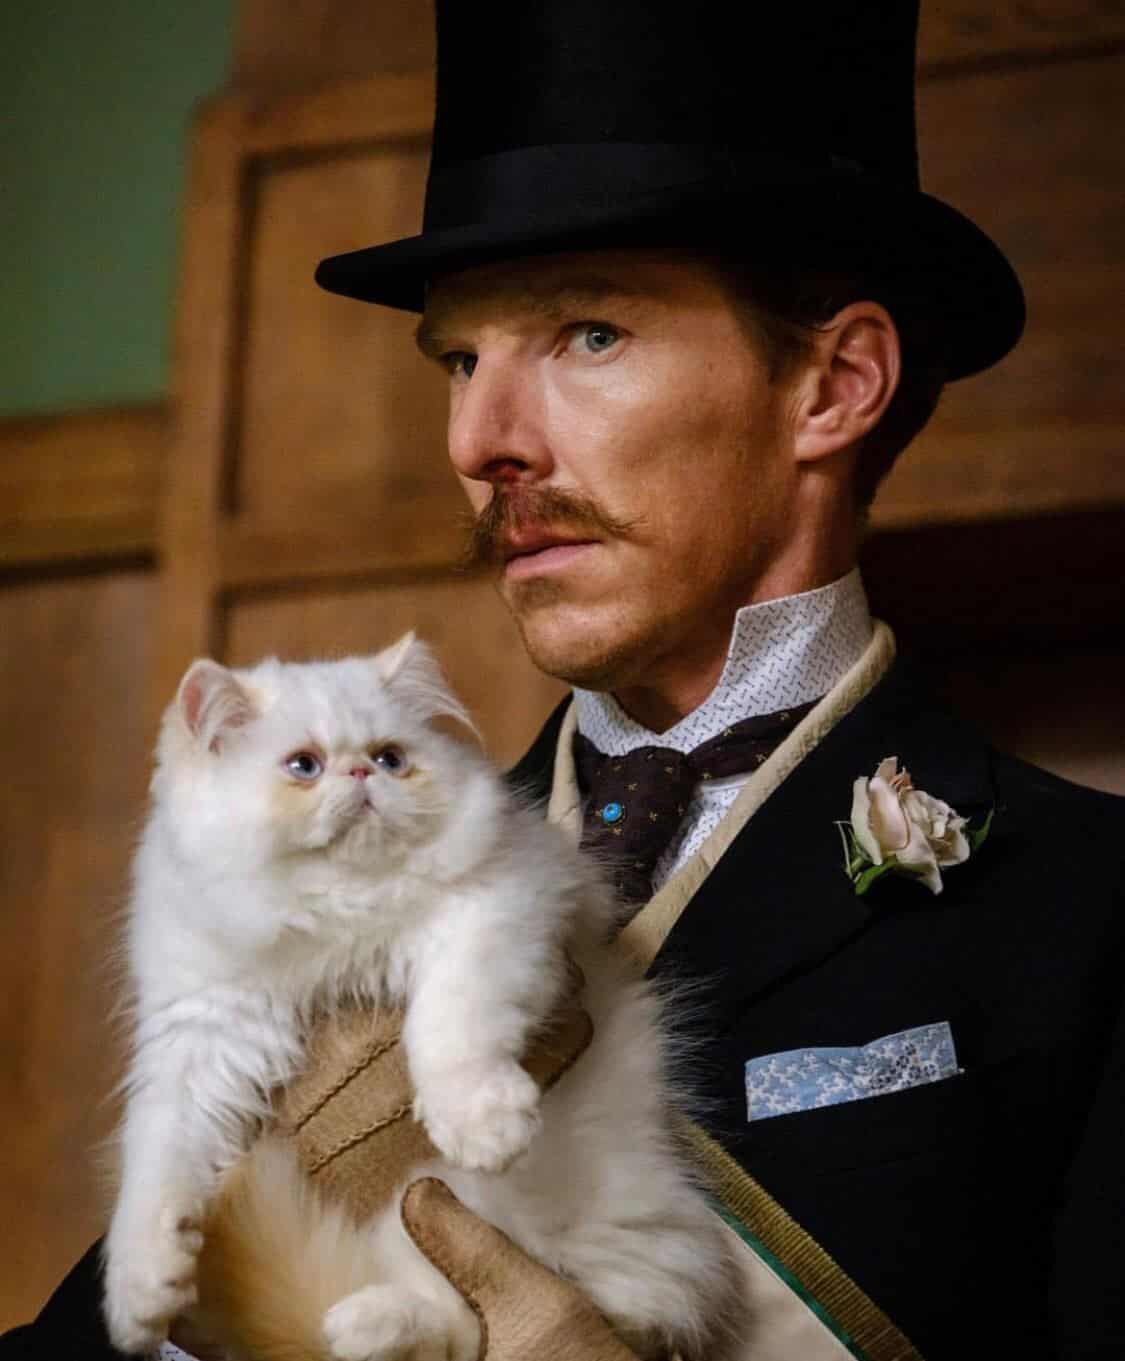 The Electrical Life of Louis Wain Benedict Cumberbatch